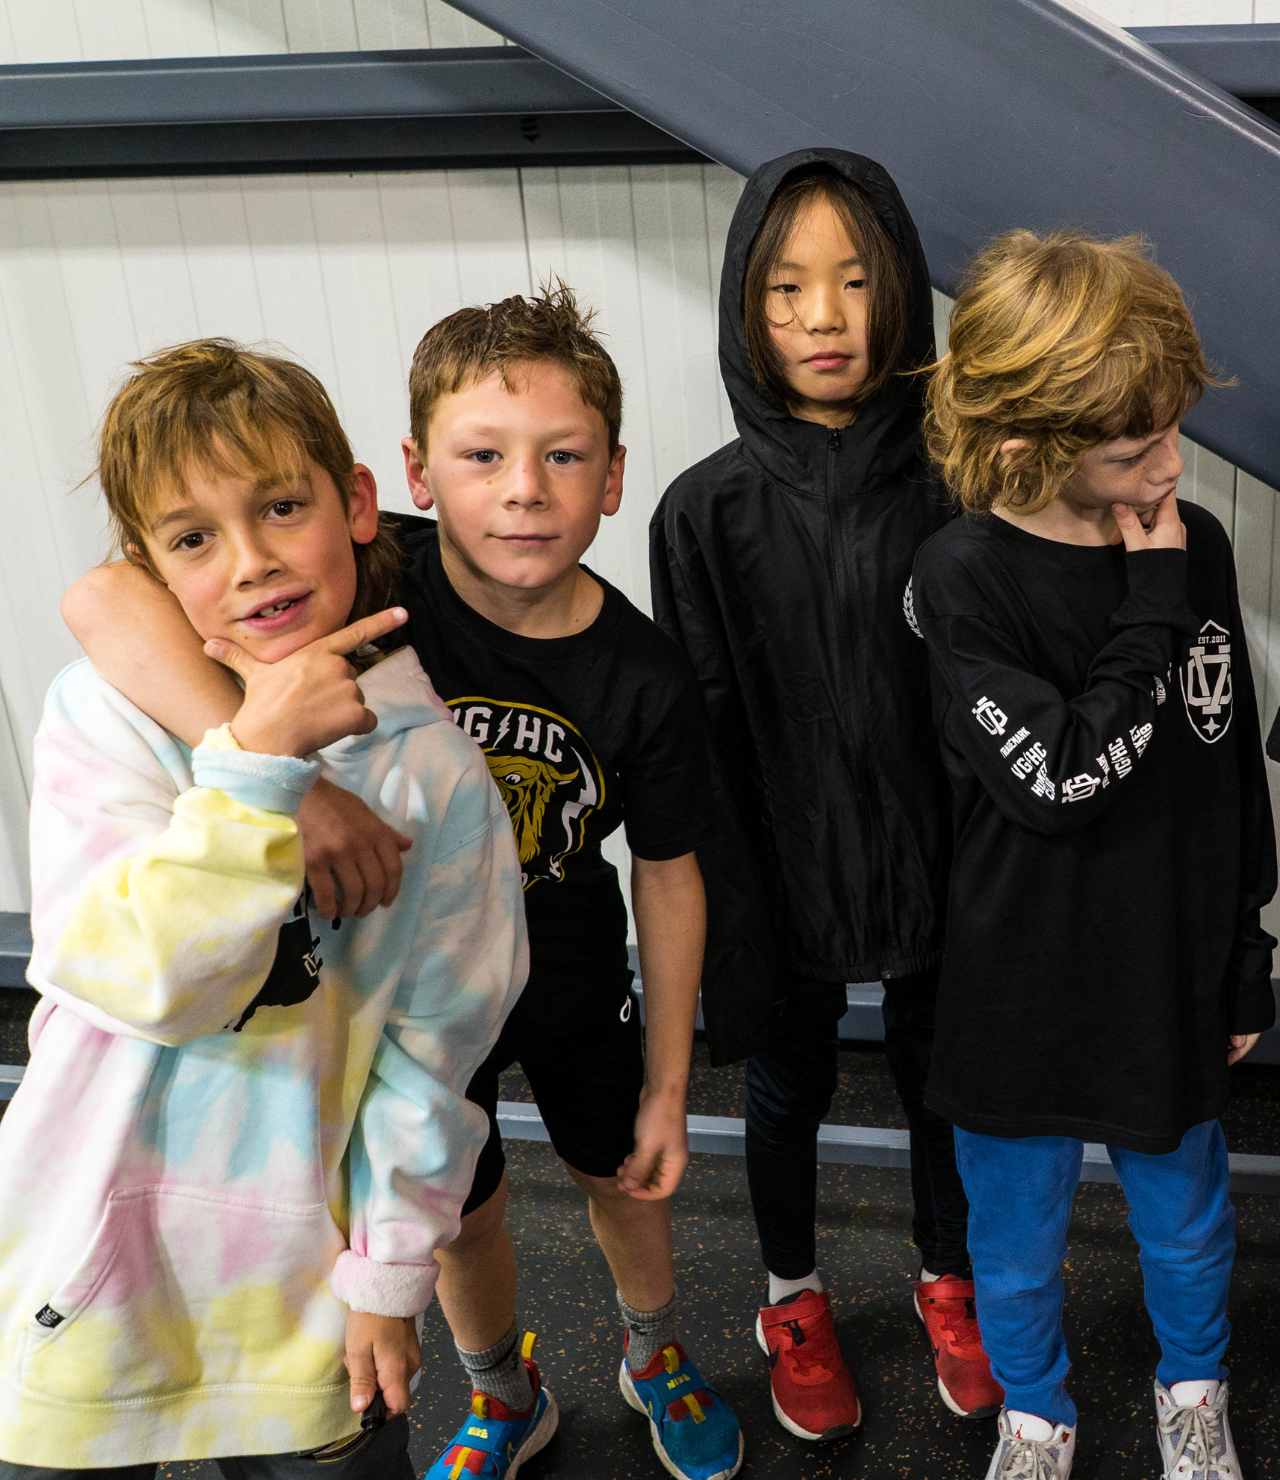 Orquest aedelweiss hockey clothing company - built by hockey fans for hockey fans. New kids youth apparel available today. Shop the entire youth hockey apparel collection today!